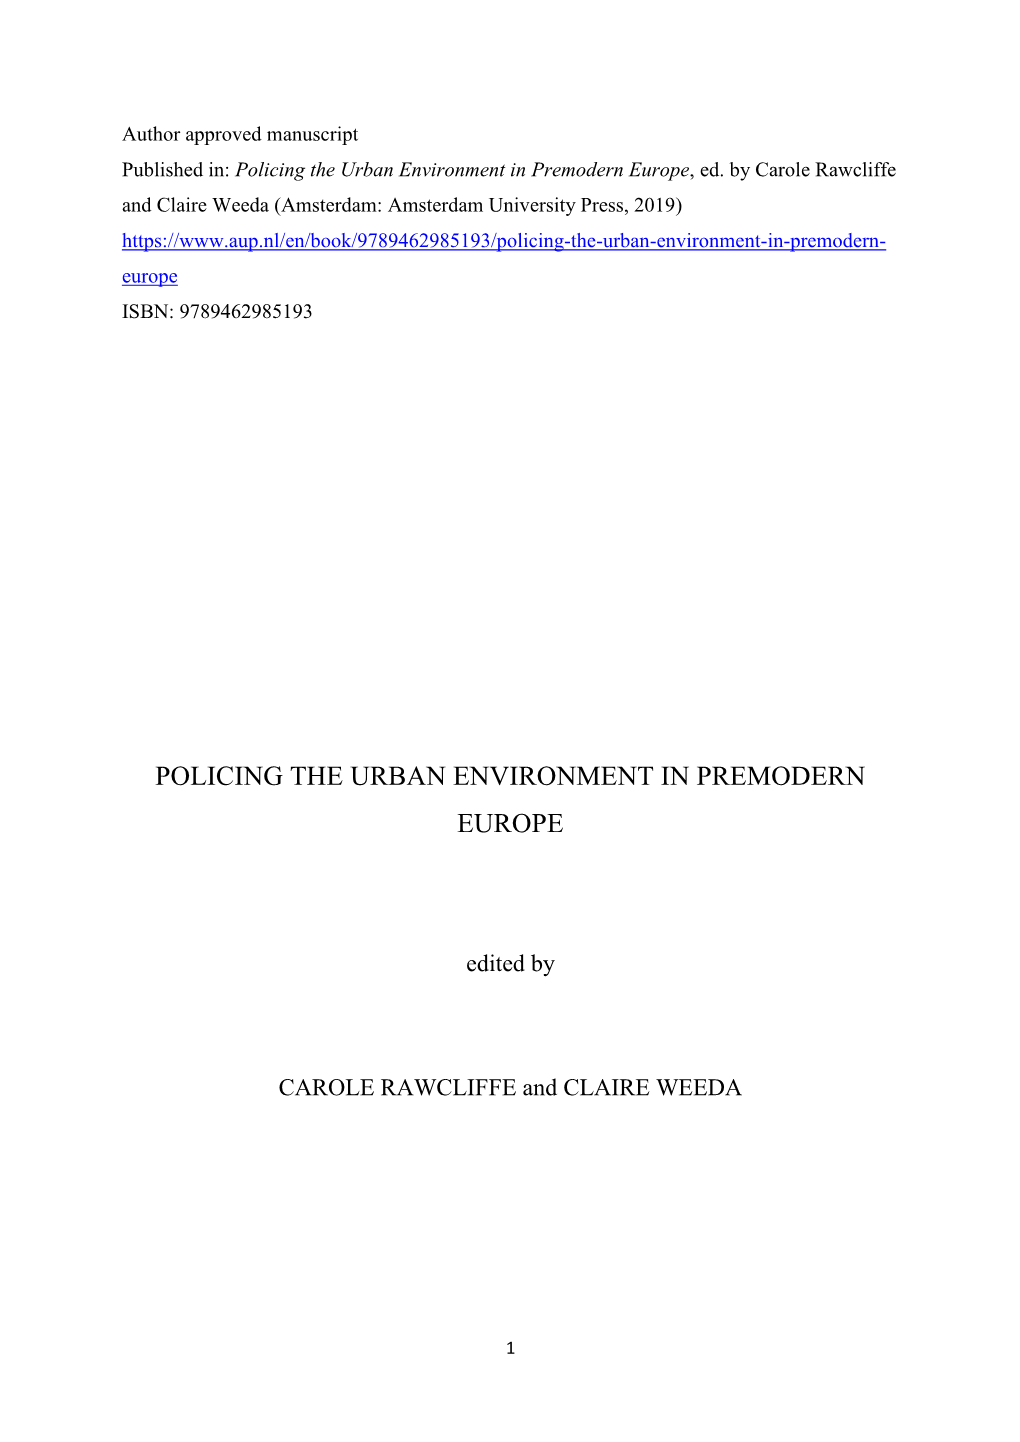 Policing the Urban Environment in Premodern Europe, Ed